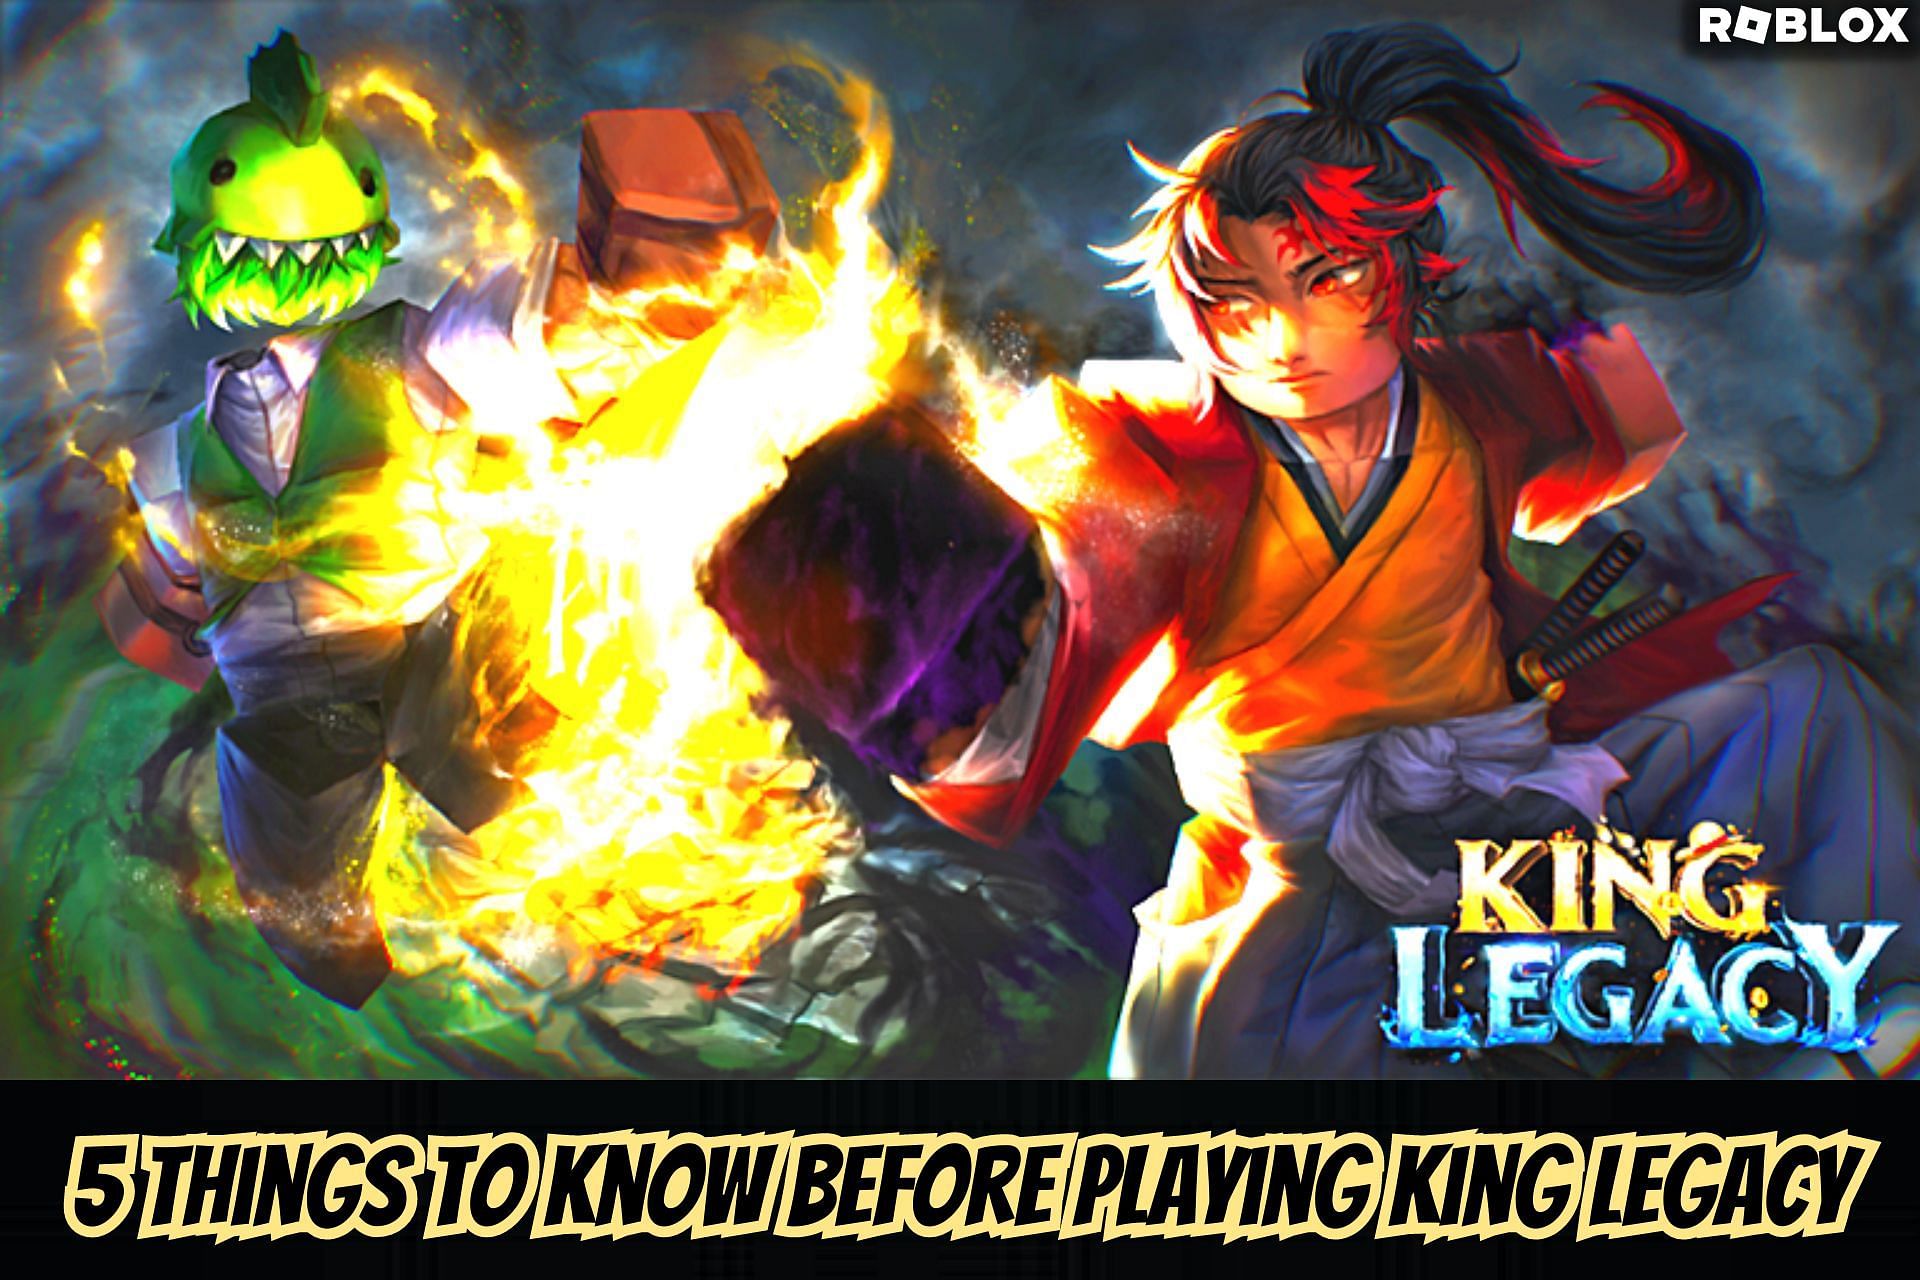 Full Guide] Getting All v2 Races, ATK v2 And Electro V2 in King Legacy 